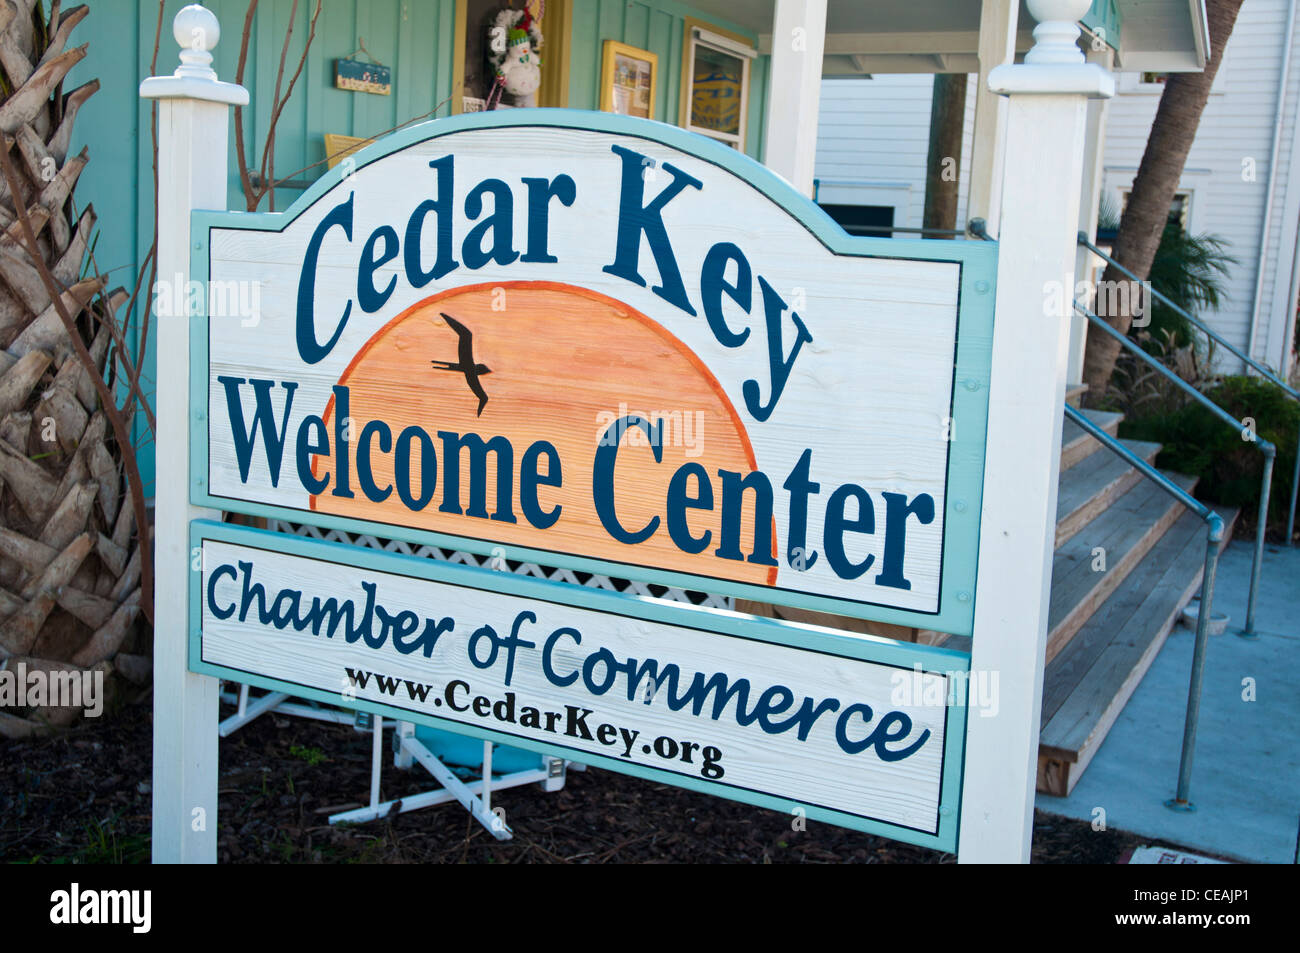 Cedar Key Welcome Center, Chamber of Commerce, Florida, United States, USA Stock Photo